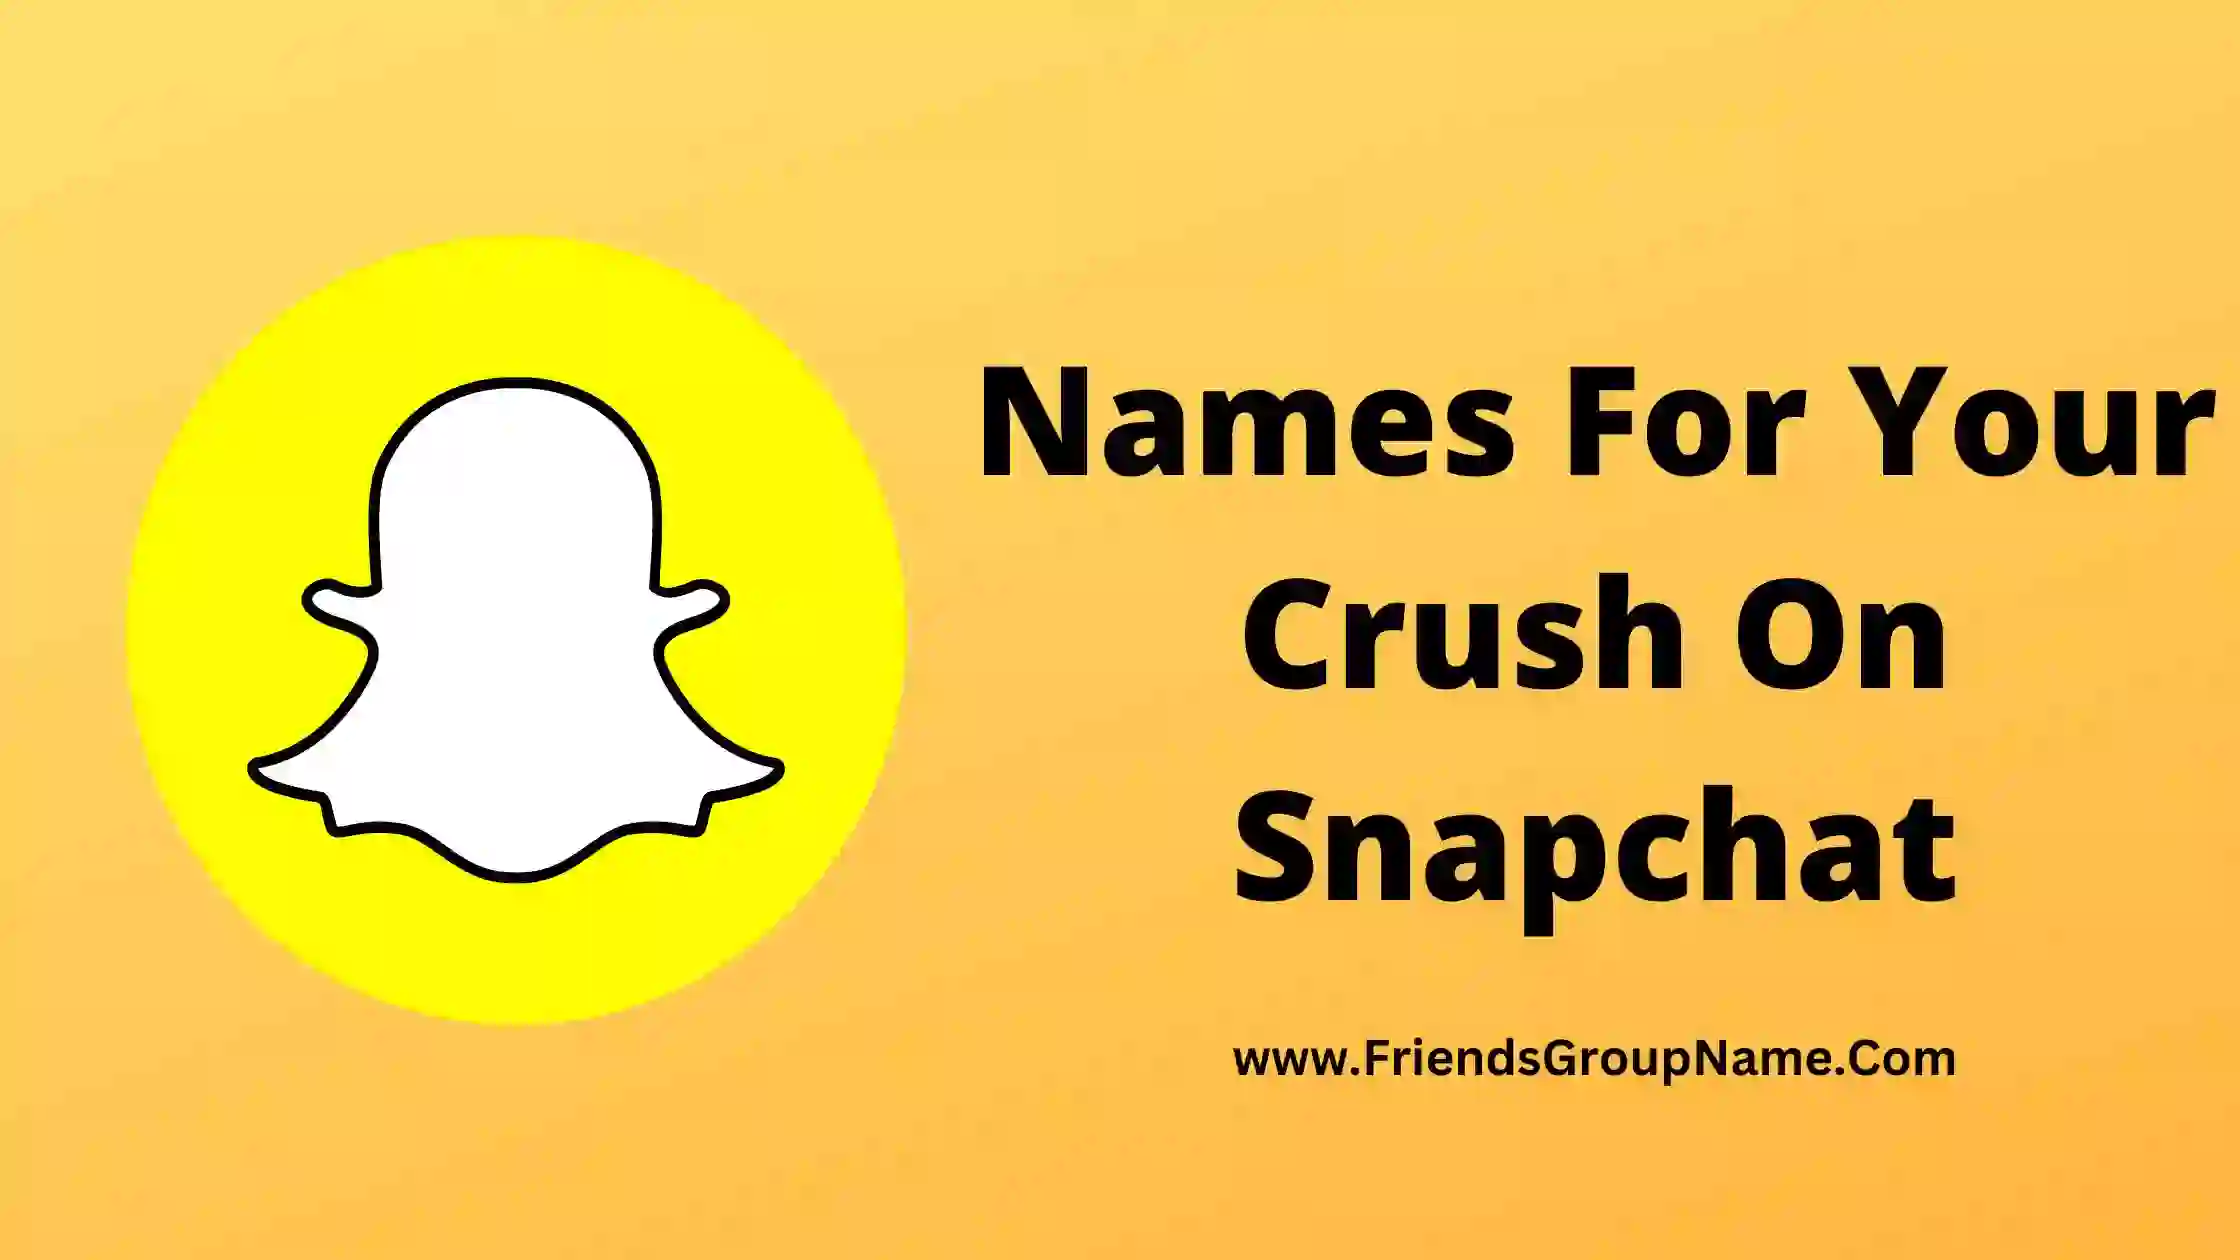 Names For Your Crush On Snapchat